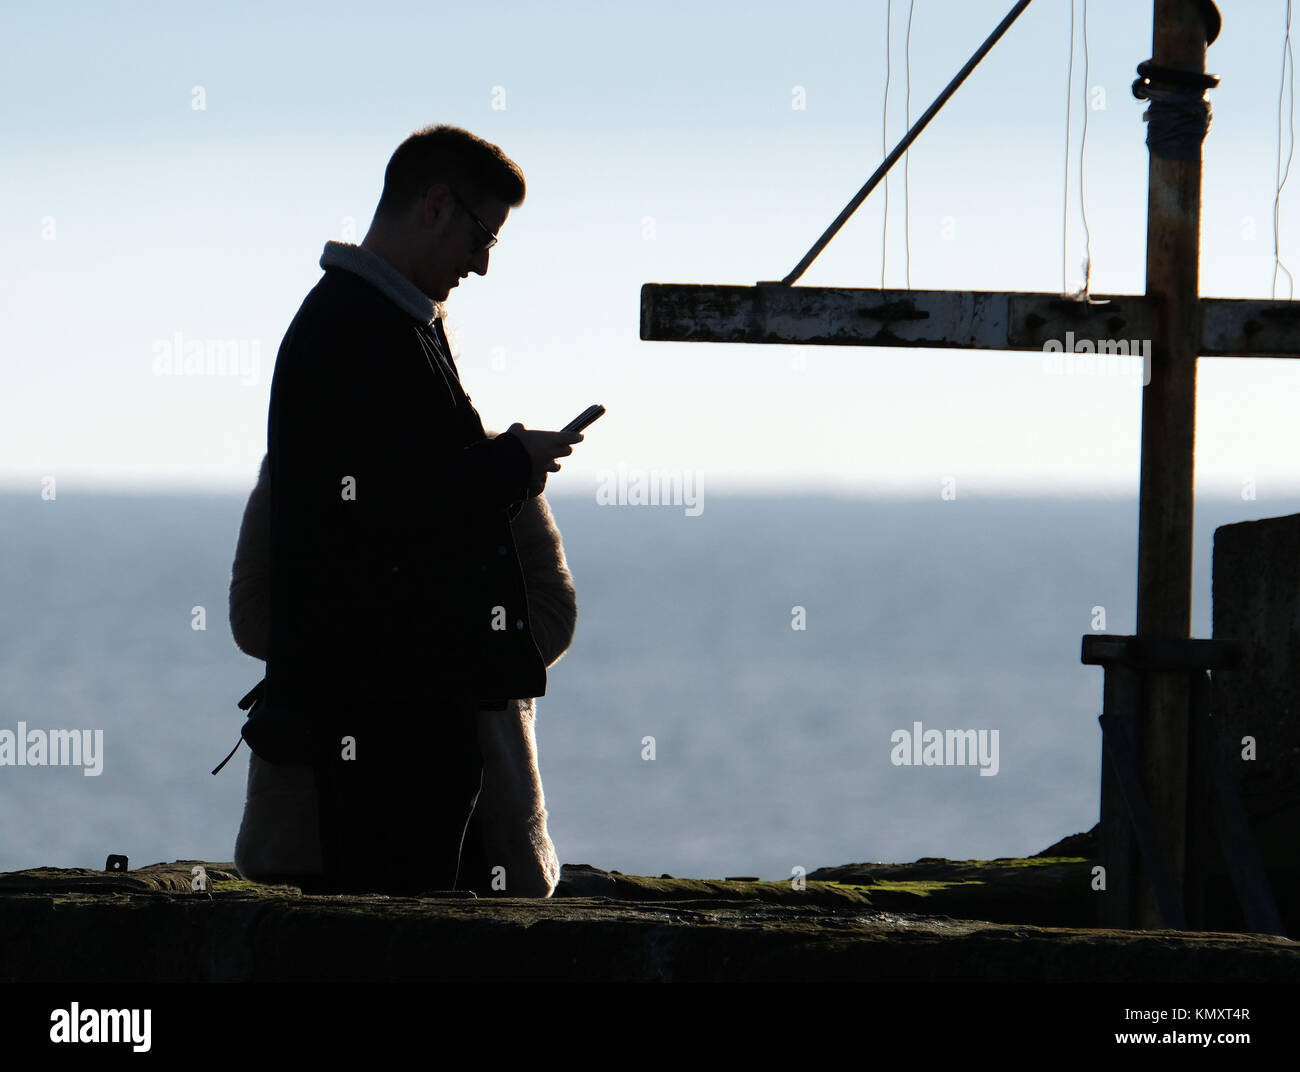 Man in silhouette on pier at seaside resort using  mobile phone. Stock Photo